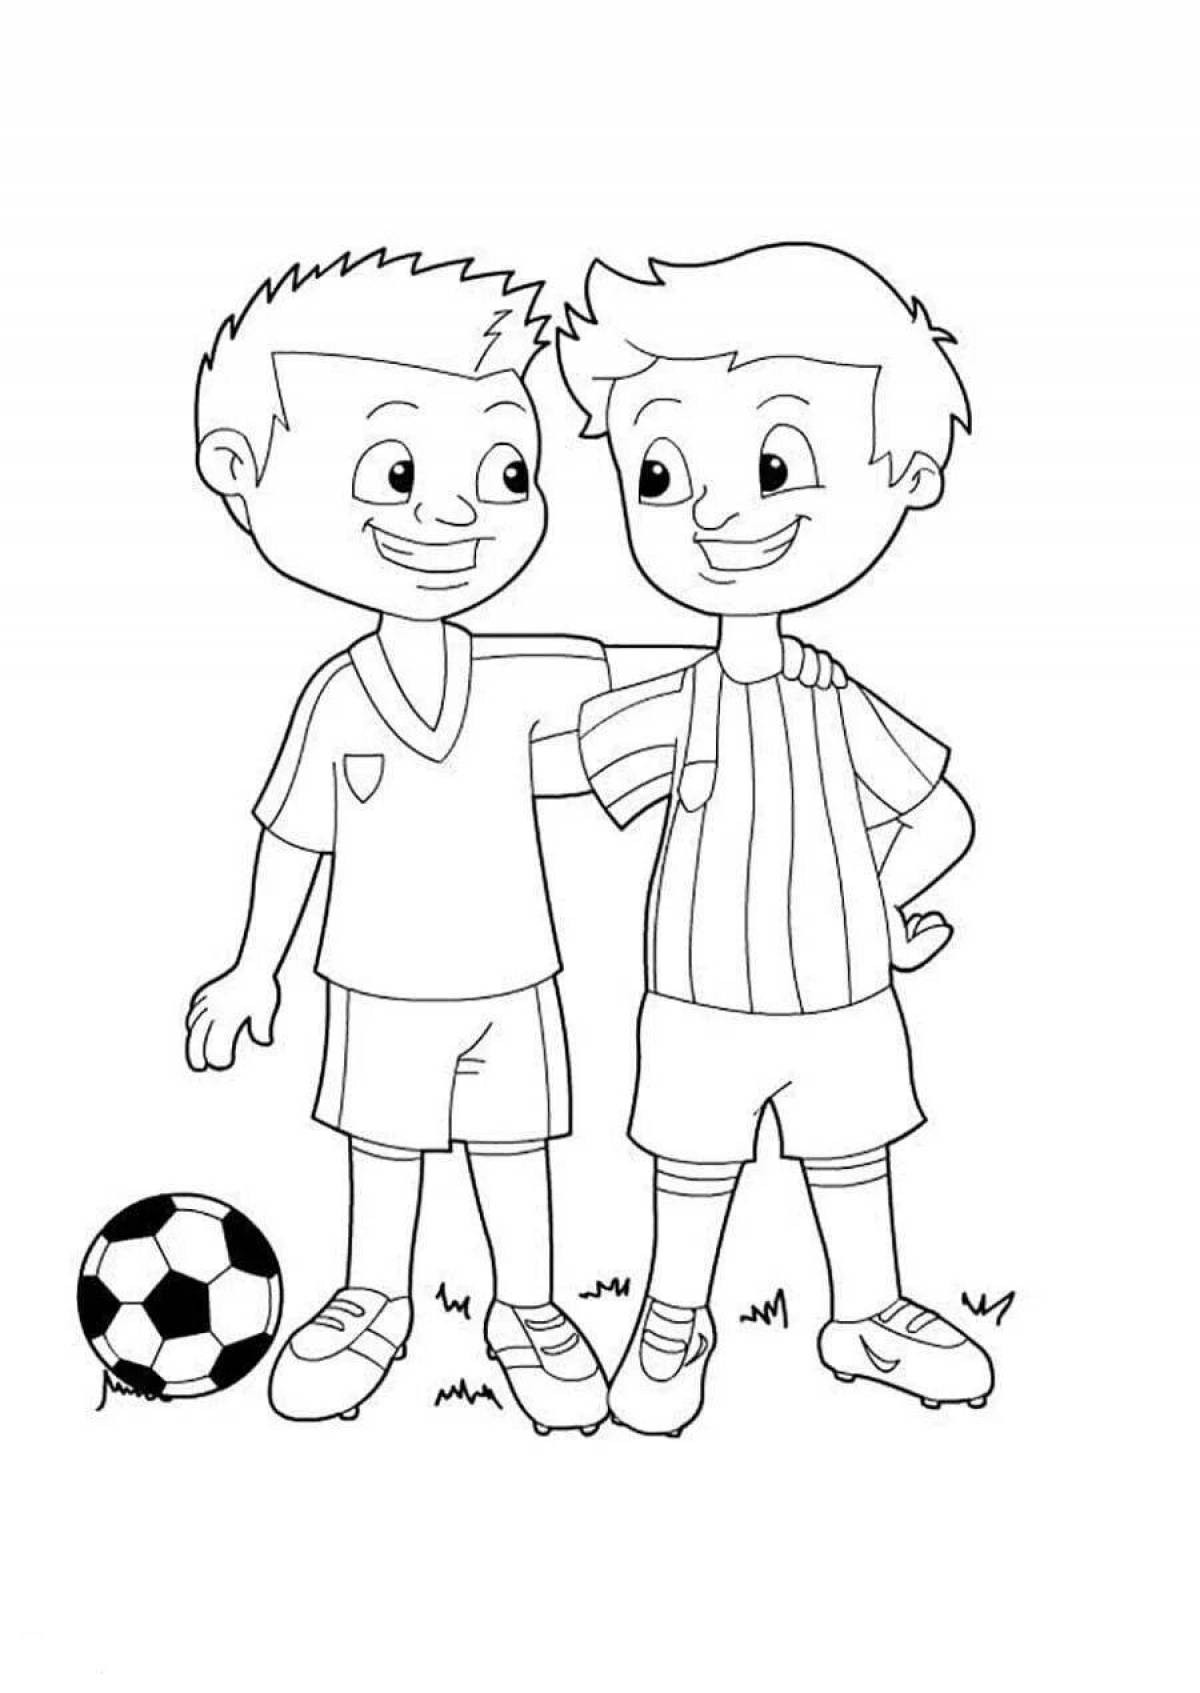 Funny friends coloring pages for kids